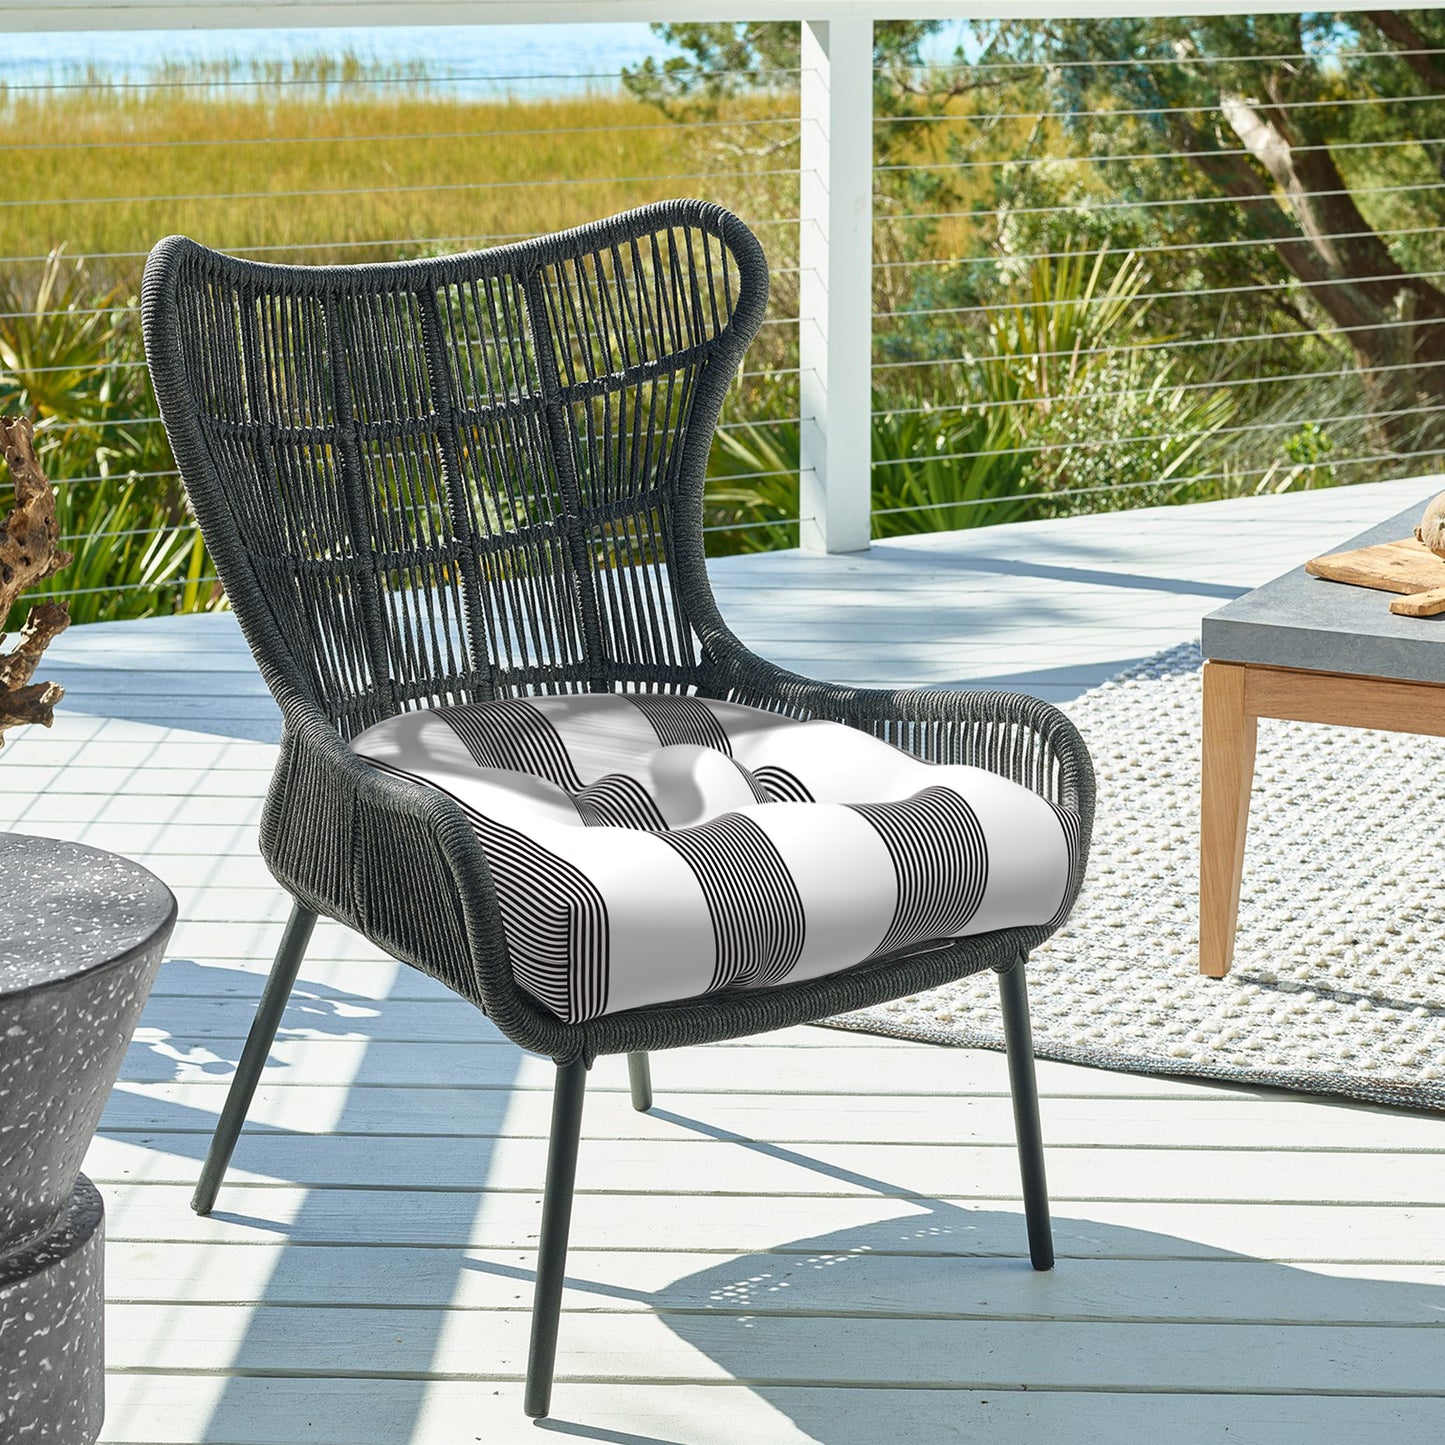 Melody Elephant Patio Wicker Chair Cushions, All Weather Outdoor Tufted Chair Pads Pack of 2, 19 x 19 x 5 Inch U-Shaped Seat Cushions of Garden Furniture Decoration, Stripe Cabana Black